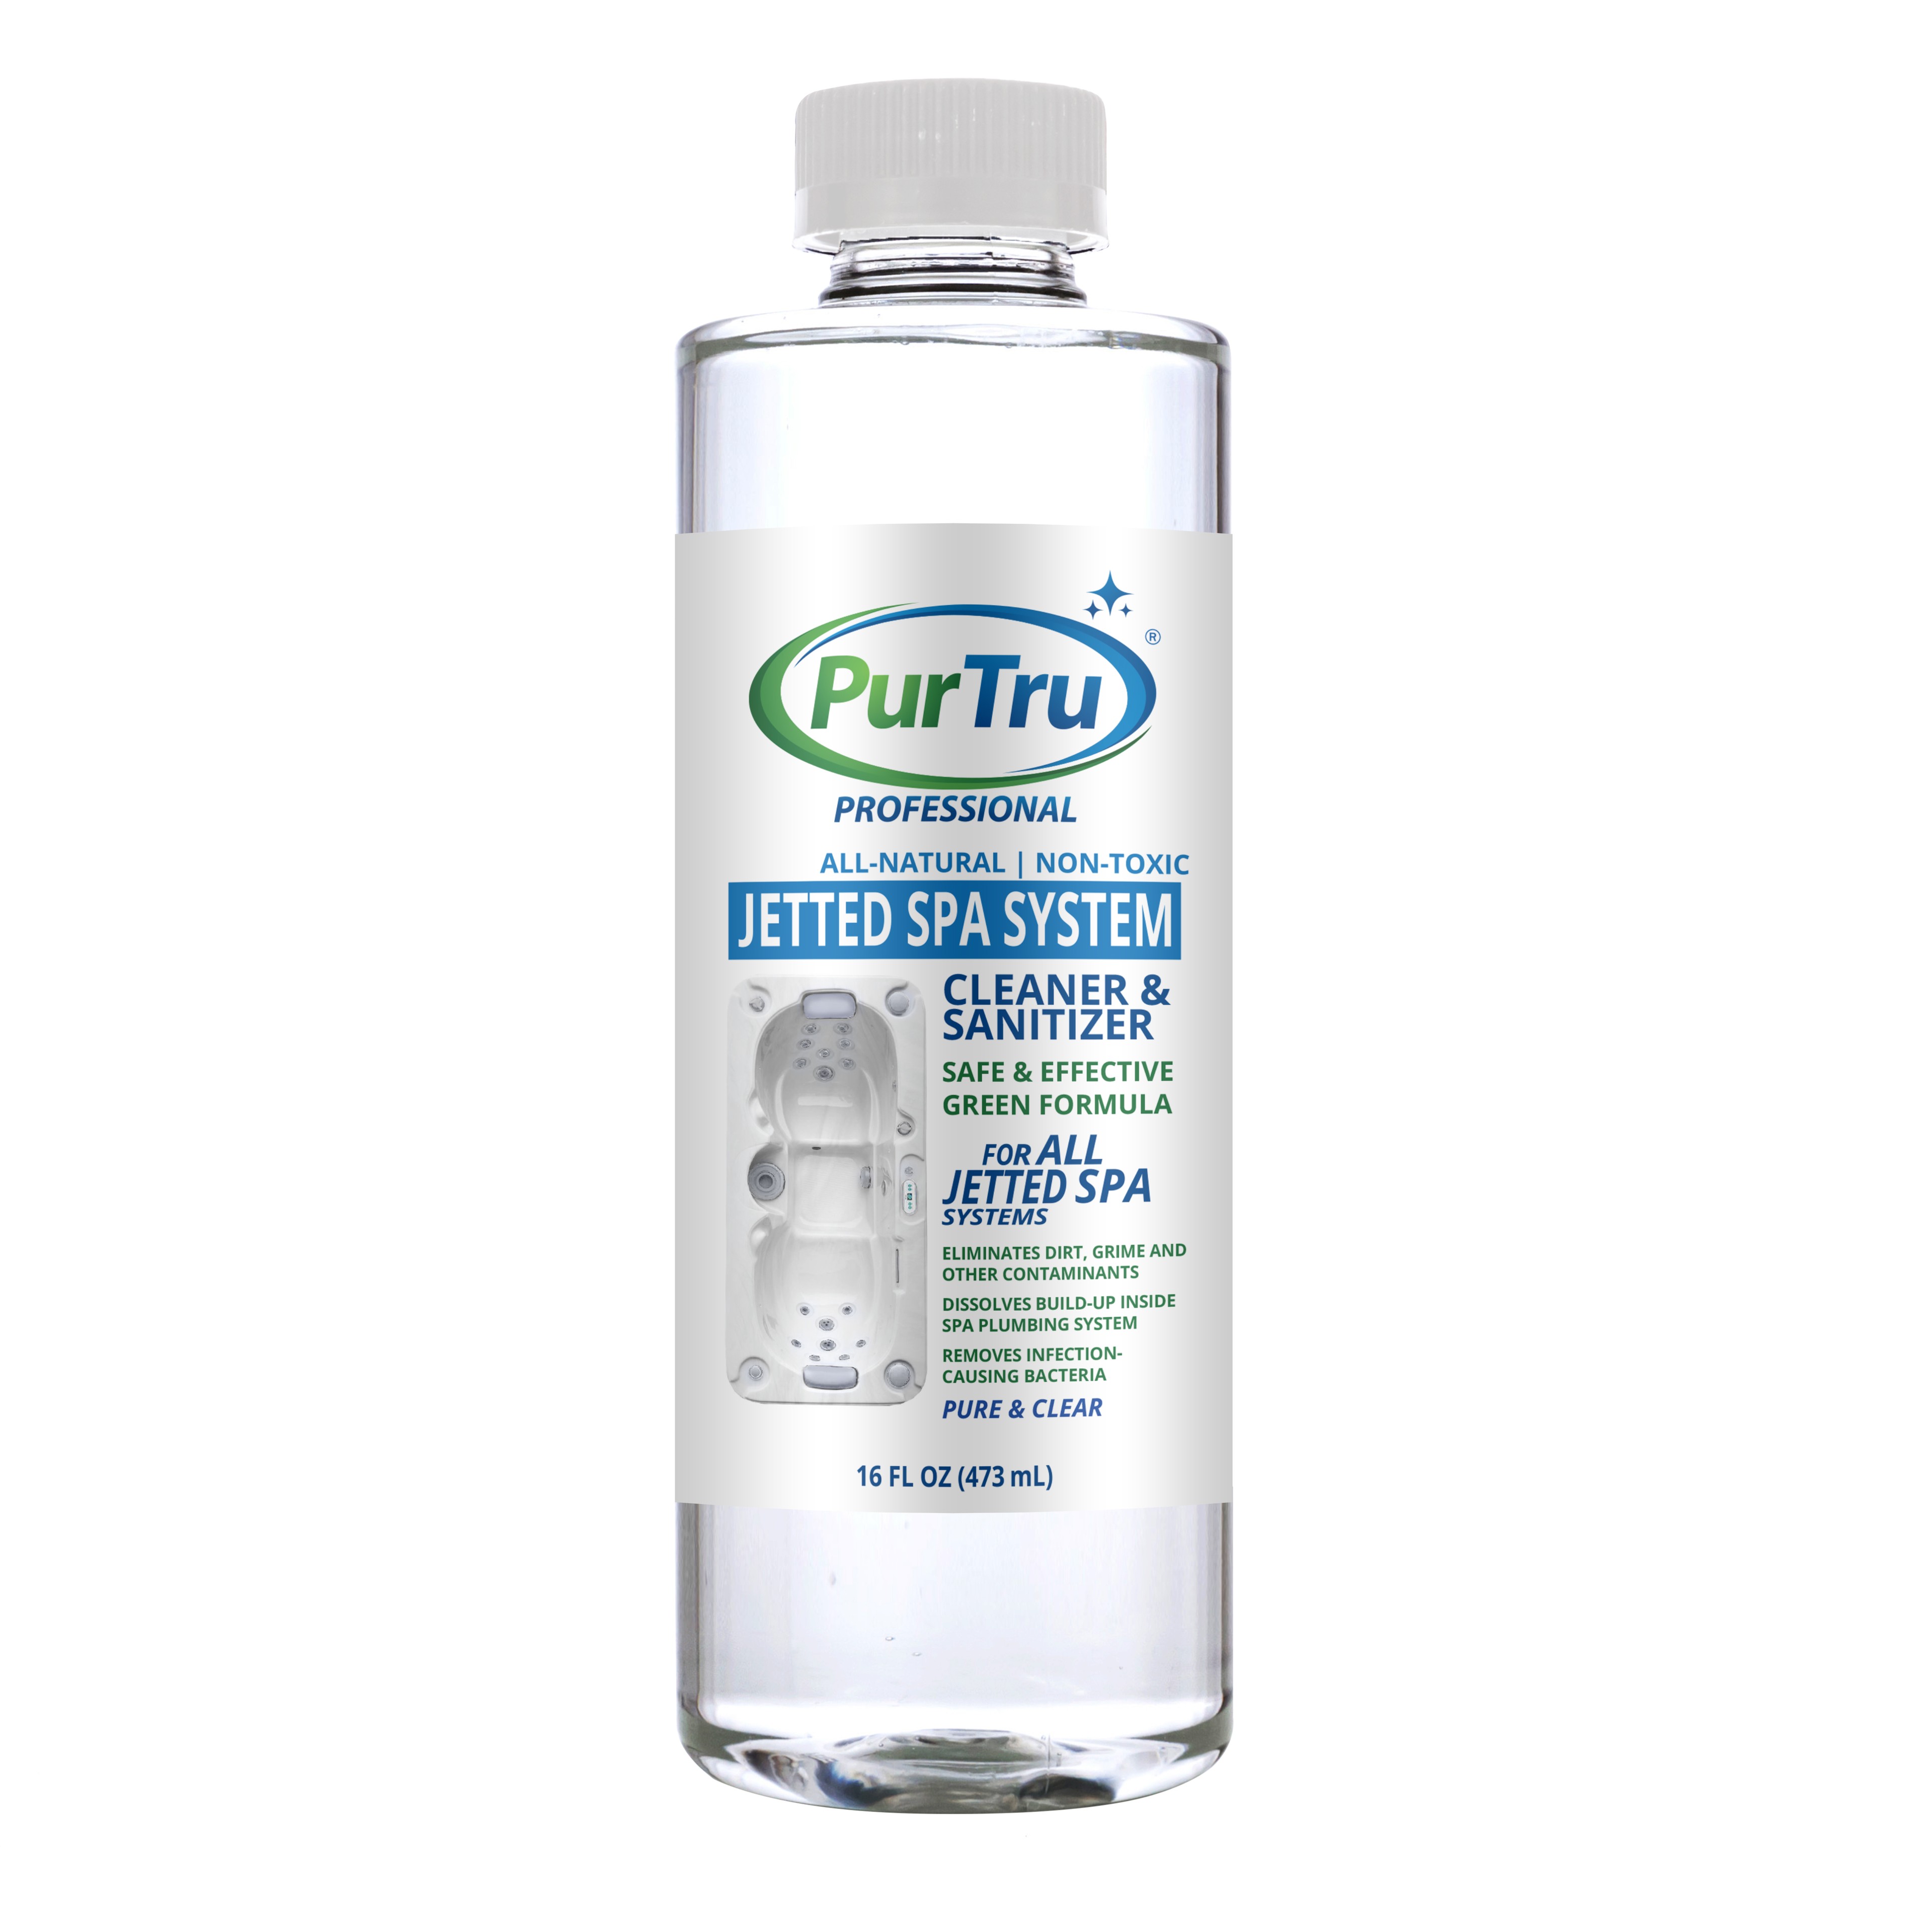 PurTru® PROFESSIONAL Jetted Spa System Sanitizing and Cleaning Solution 16 Fl Oz